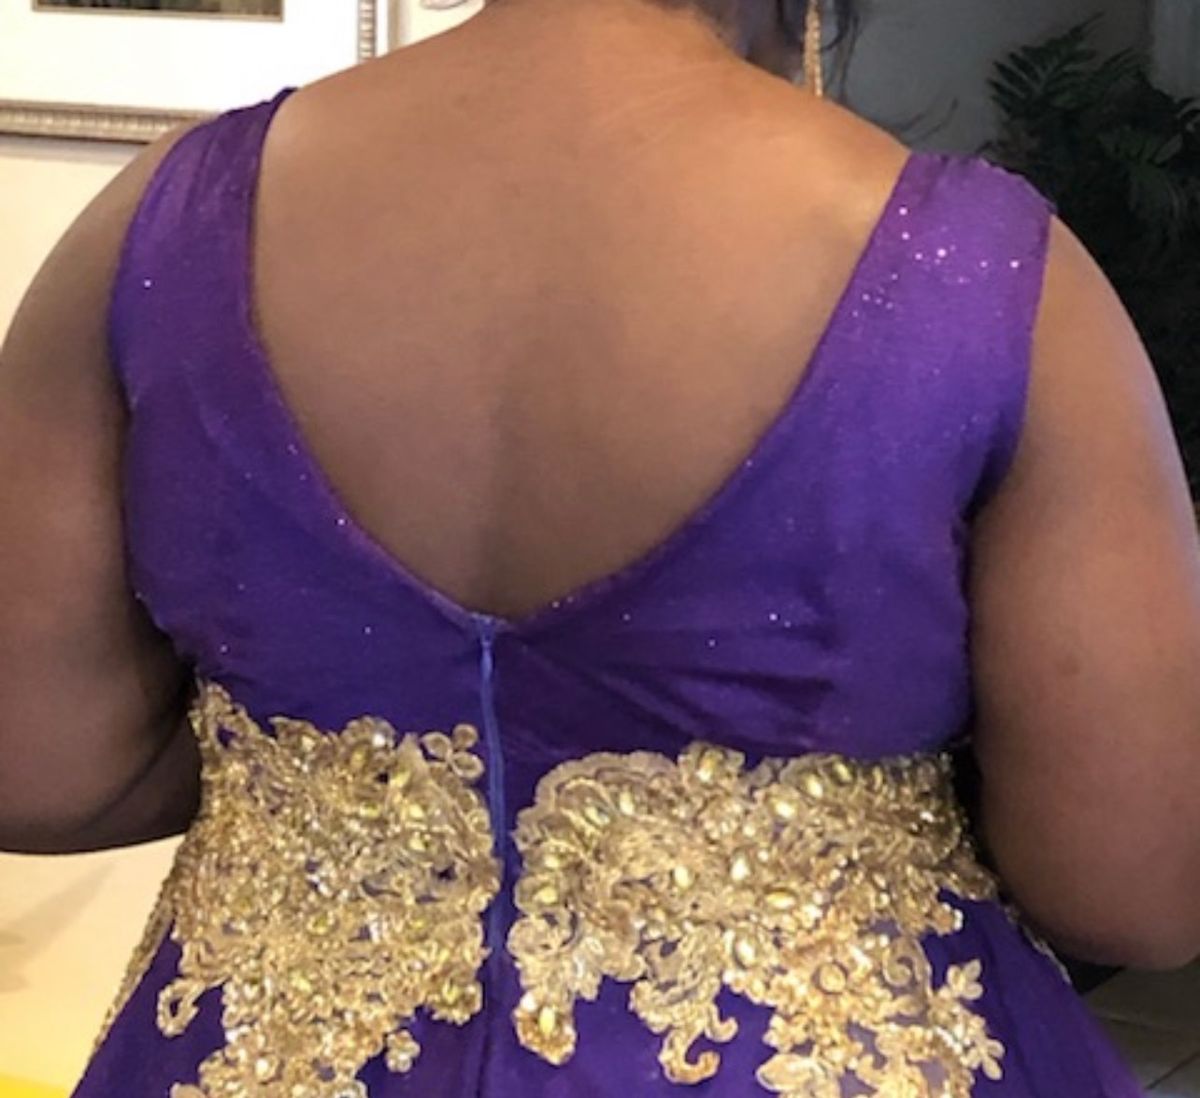 Plus Size 18 Prom Purple Ball Gown on Queenly